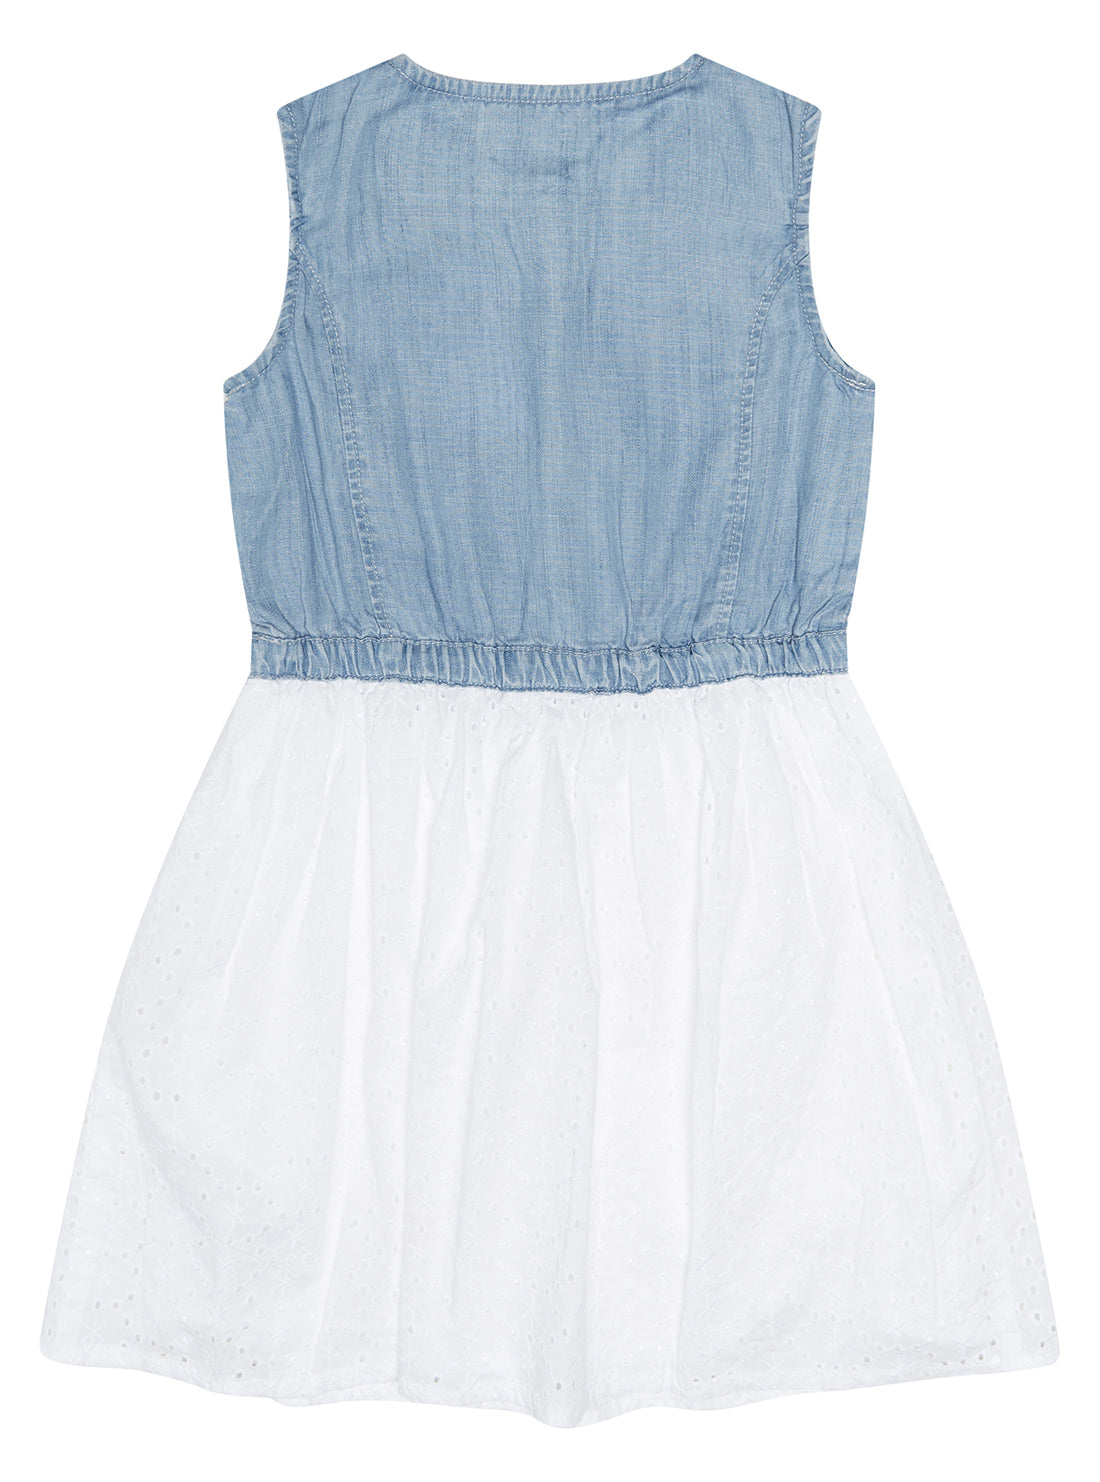 Girl's Blue Denim and White Sleeveless Dress (2-7) | GUESS Kids | back view